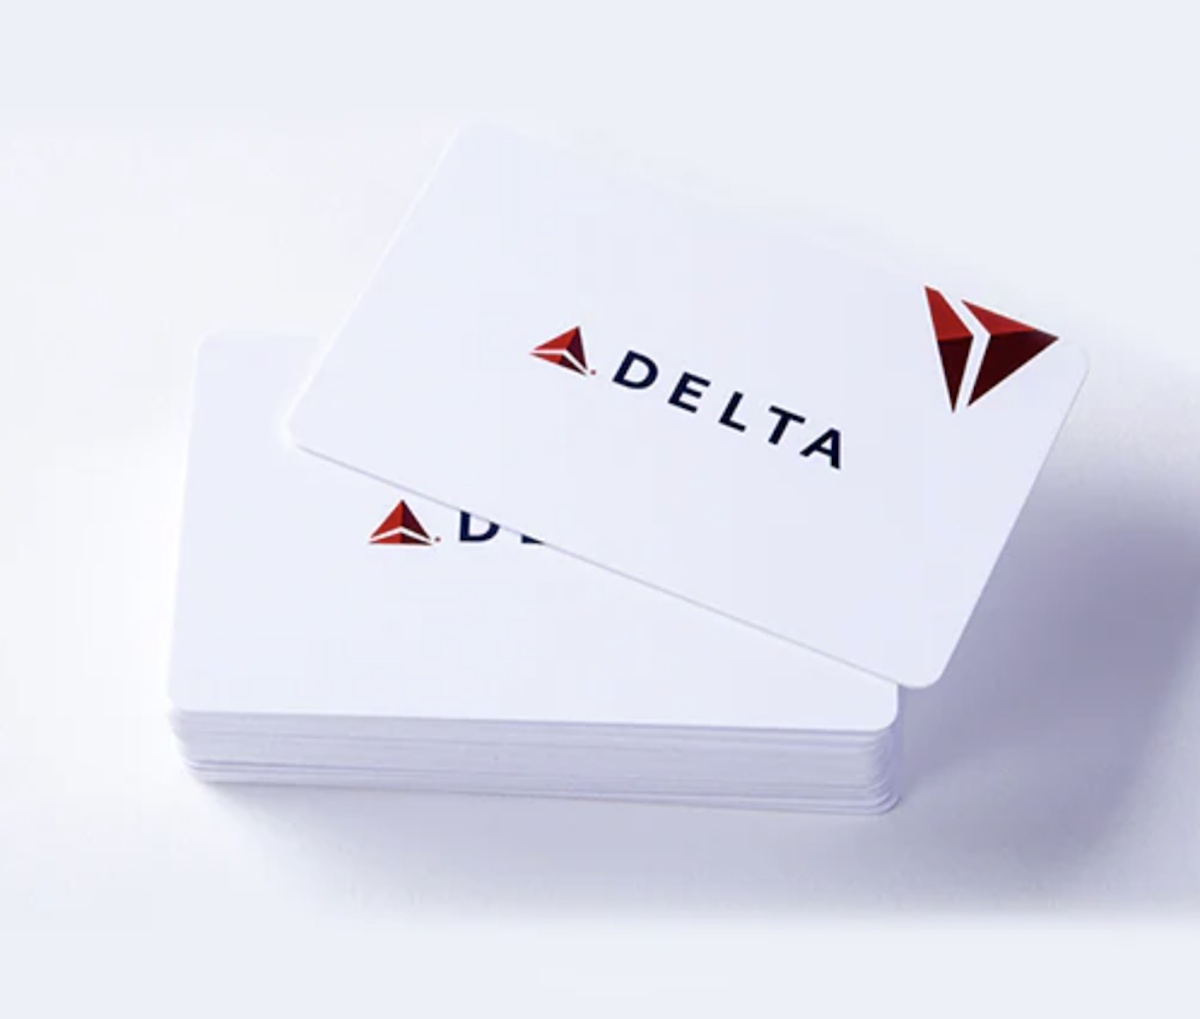 Delta passengers offered $10,000 to get off oversold flight